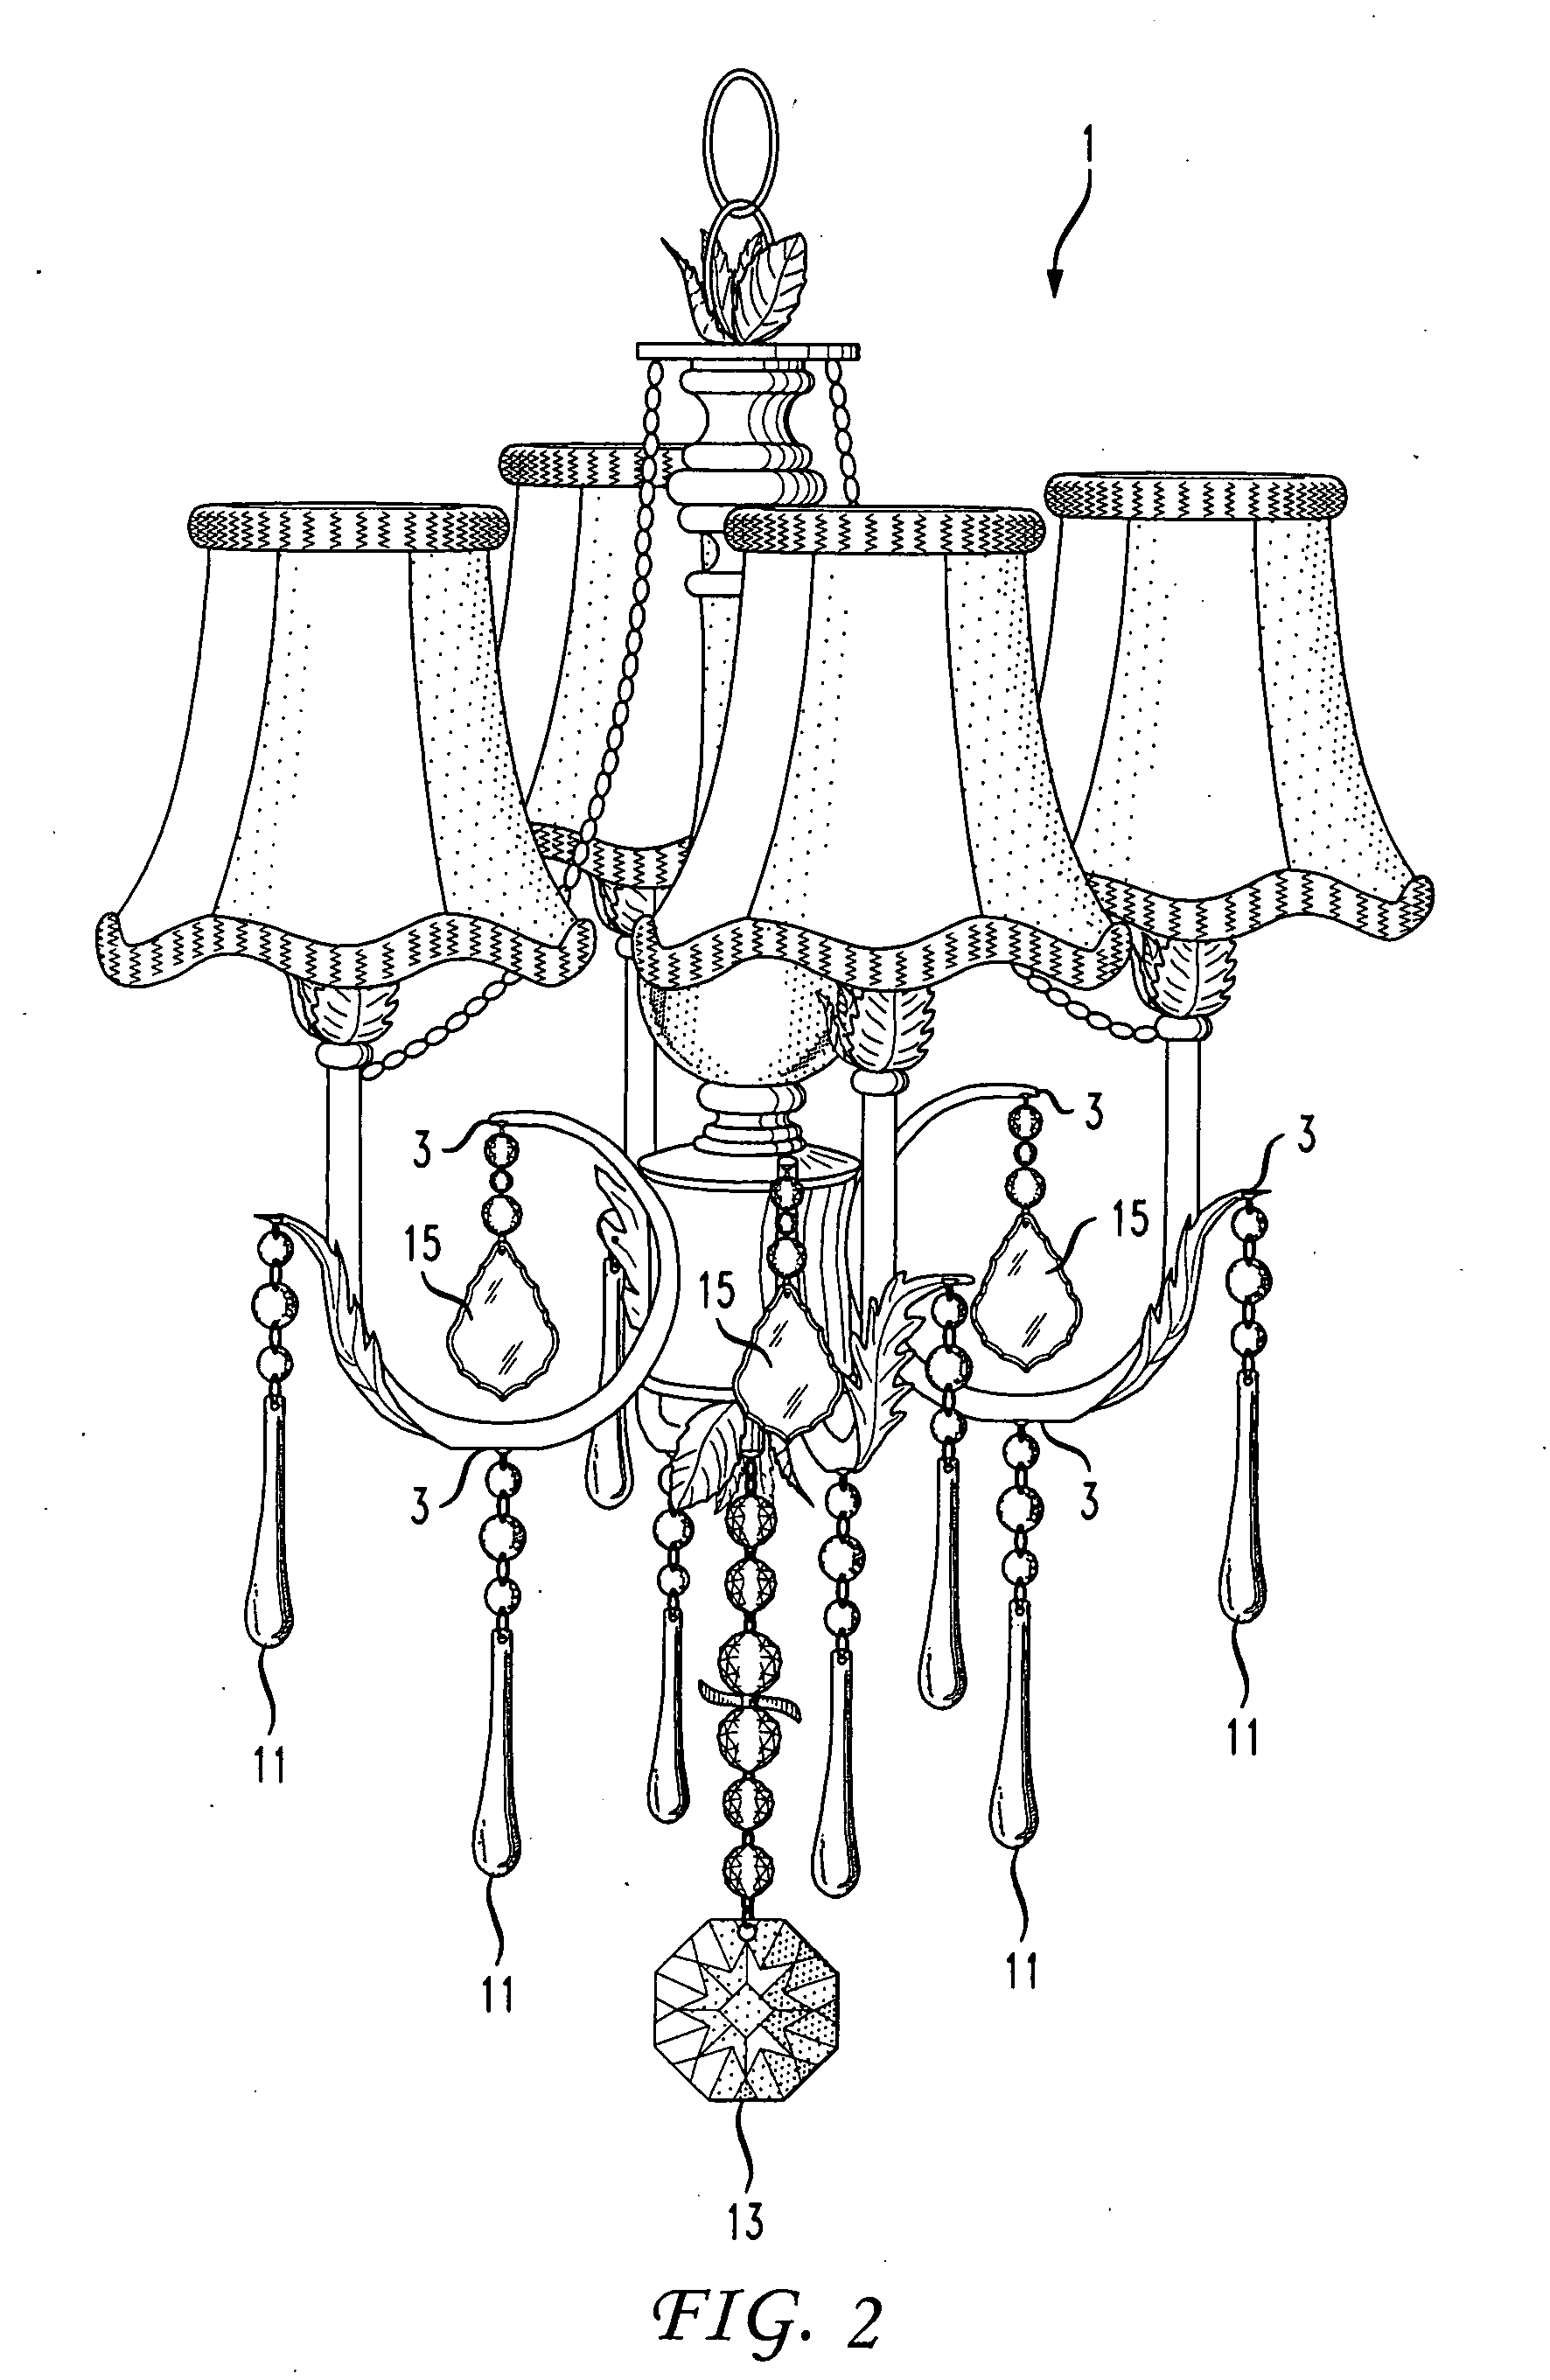 Interchangeable adornments for lighting fixtures, household apparatuses and fixtures and the like